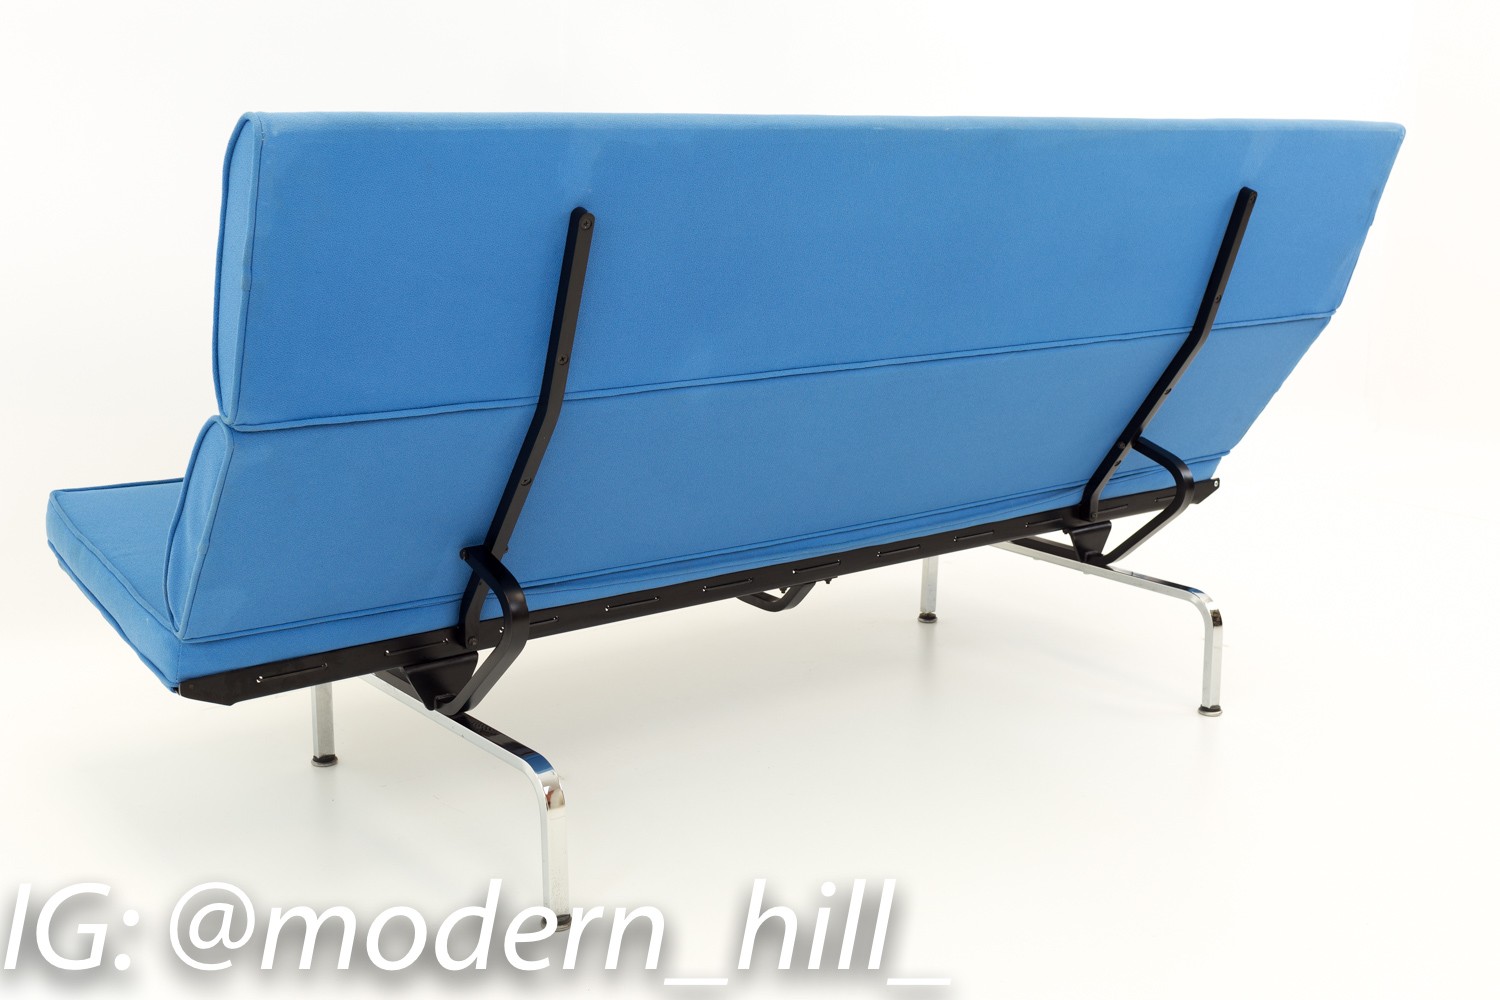 Eames for Herman Miller Mid Century Modern Compact Daybed Sofa